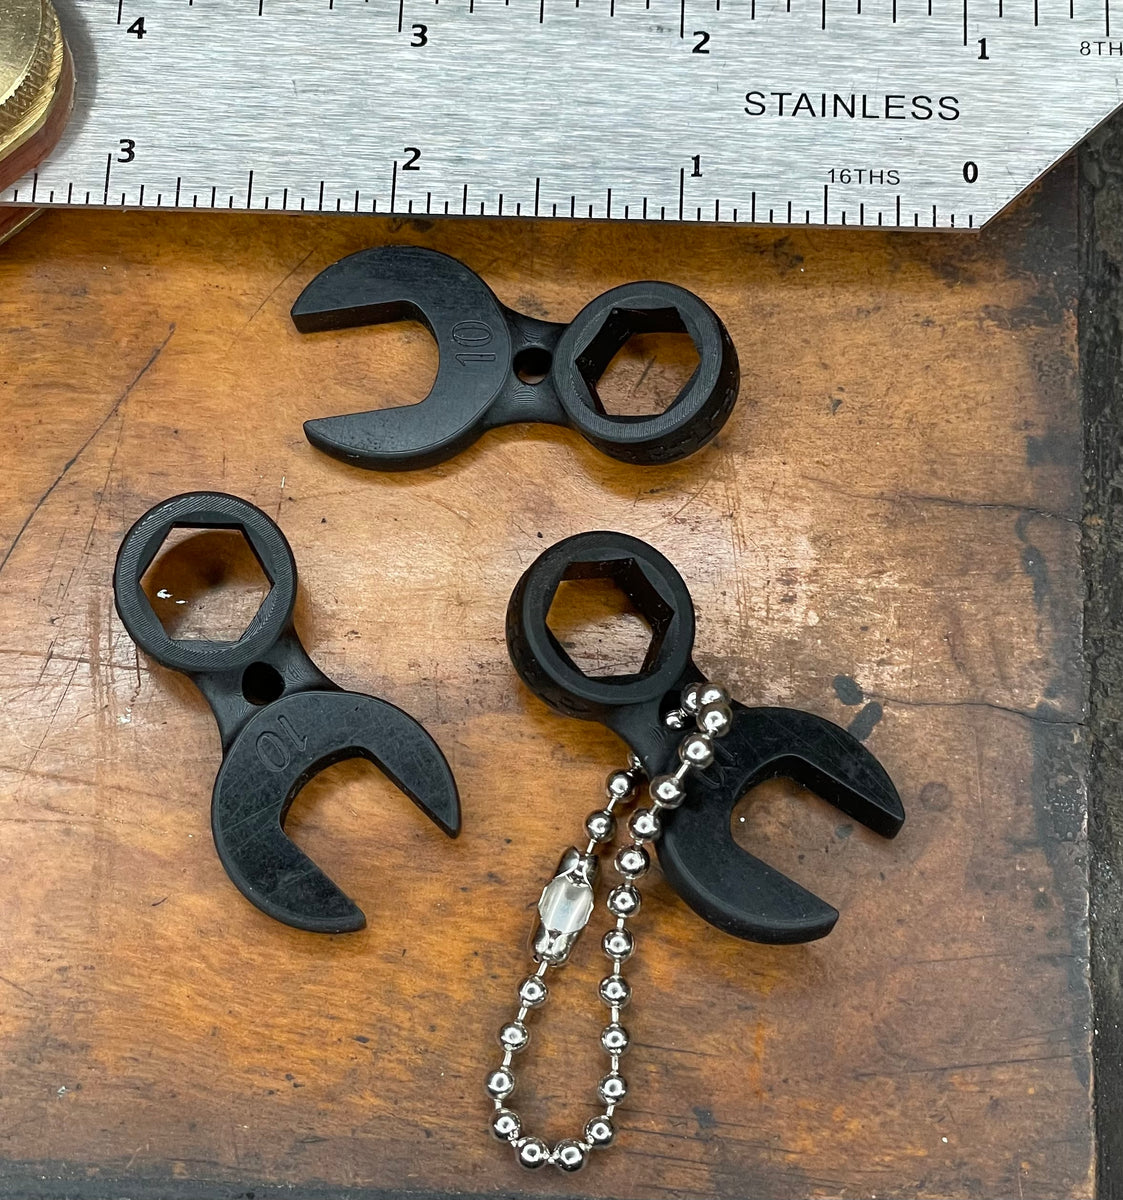 3D Printed 10mm Stubby Combination Wrench Keychain – Get A Grip & More